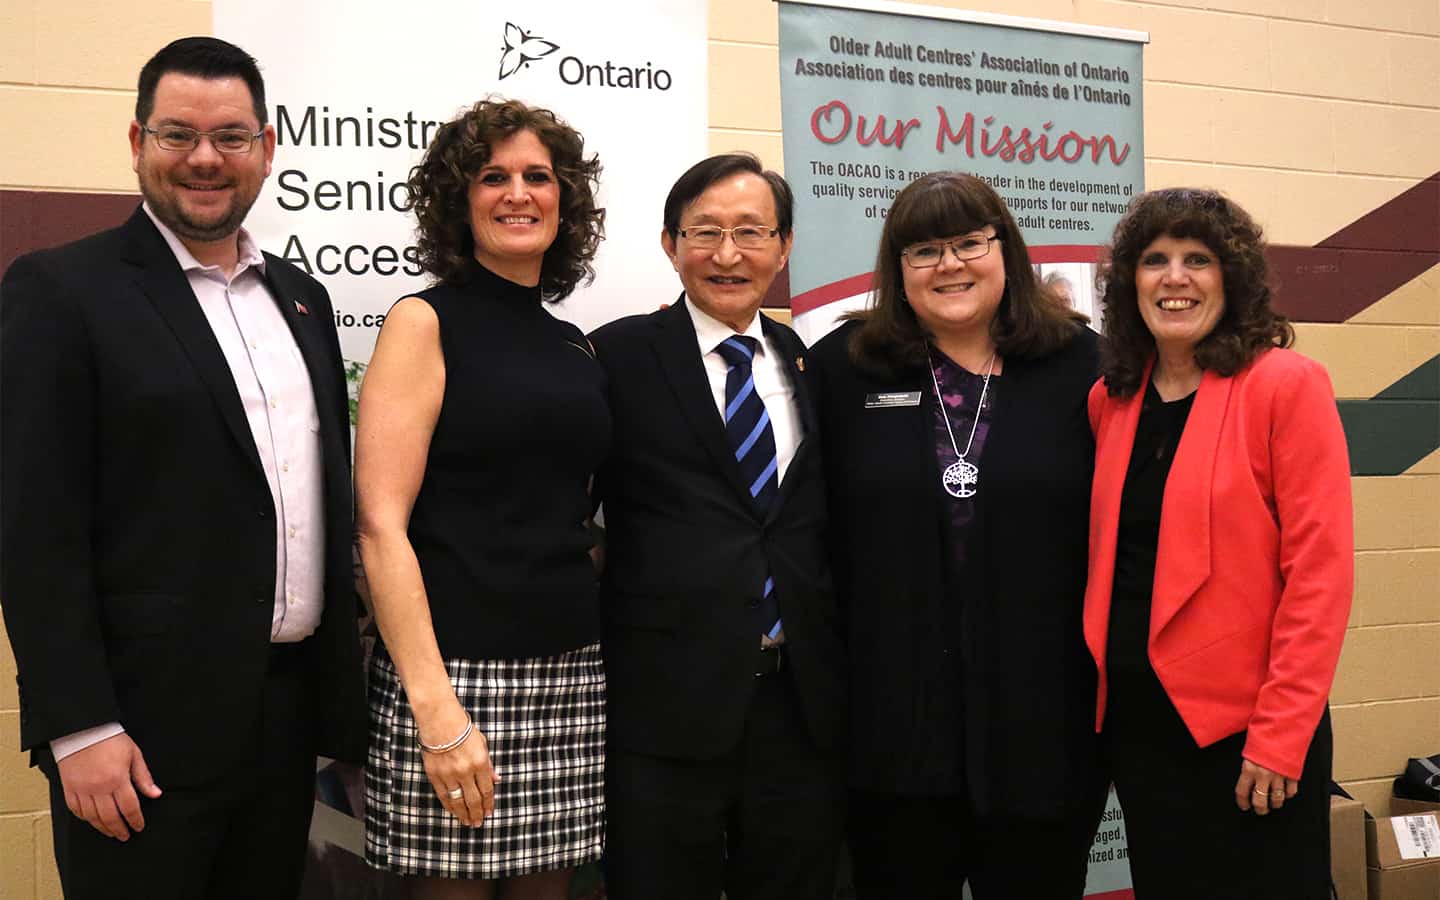                      Provincial minister delivers address at seniors’ active living fair                             
                     